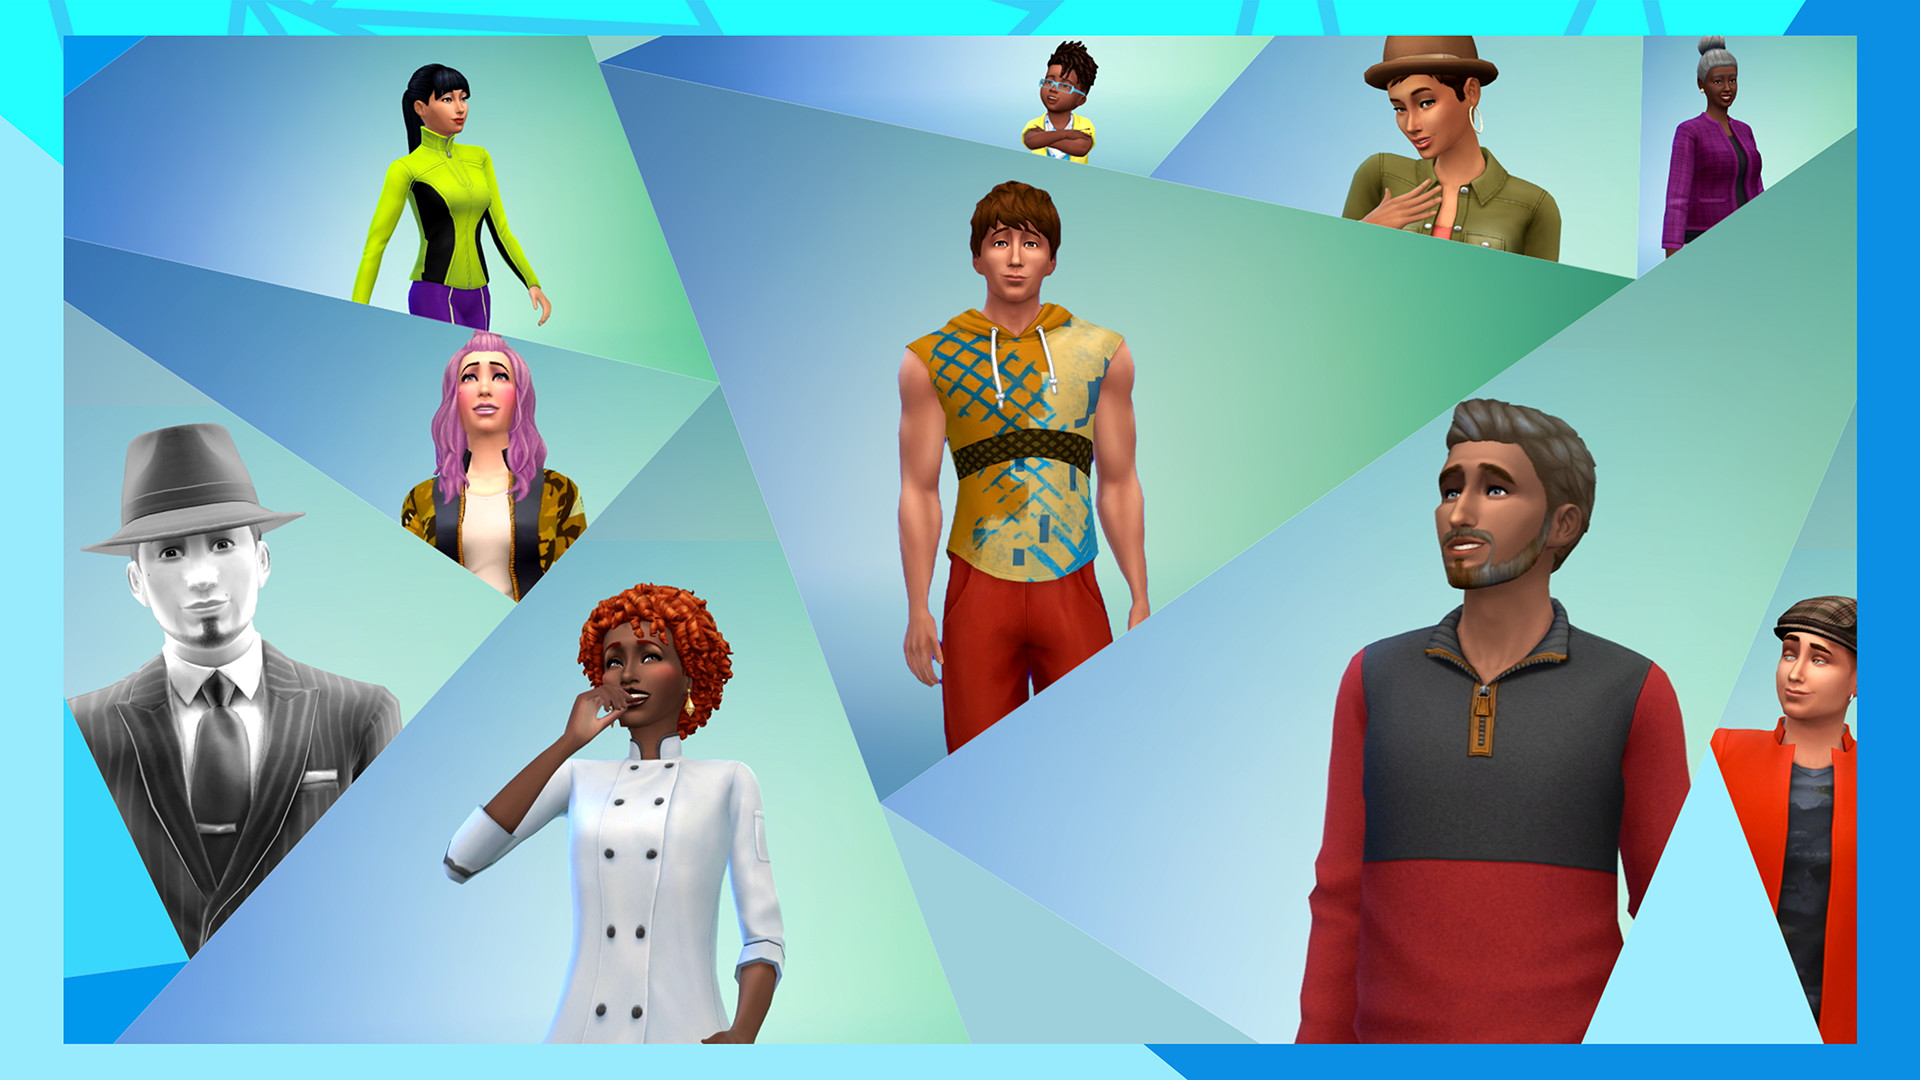 The Sims 4' will be free to play starting next month